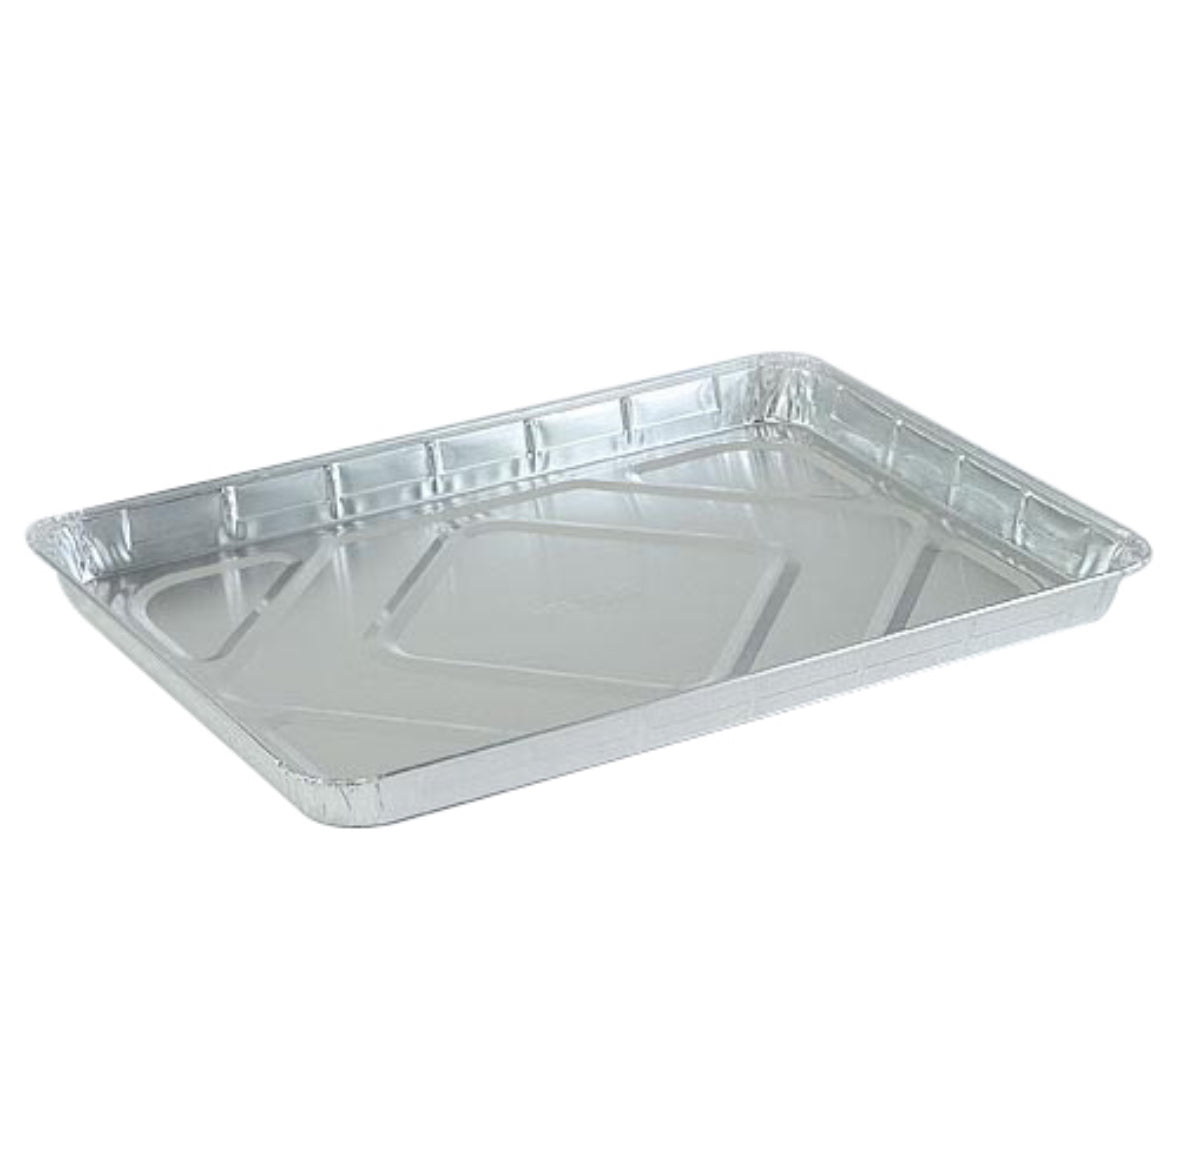 Cookie Sheet (50 count)